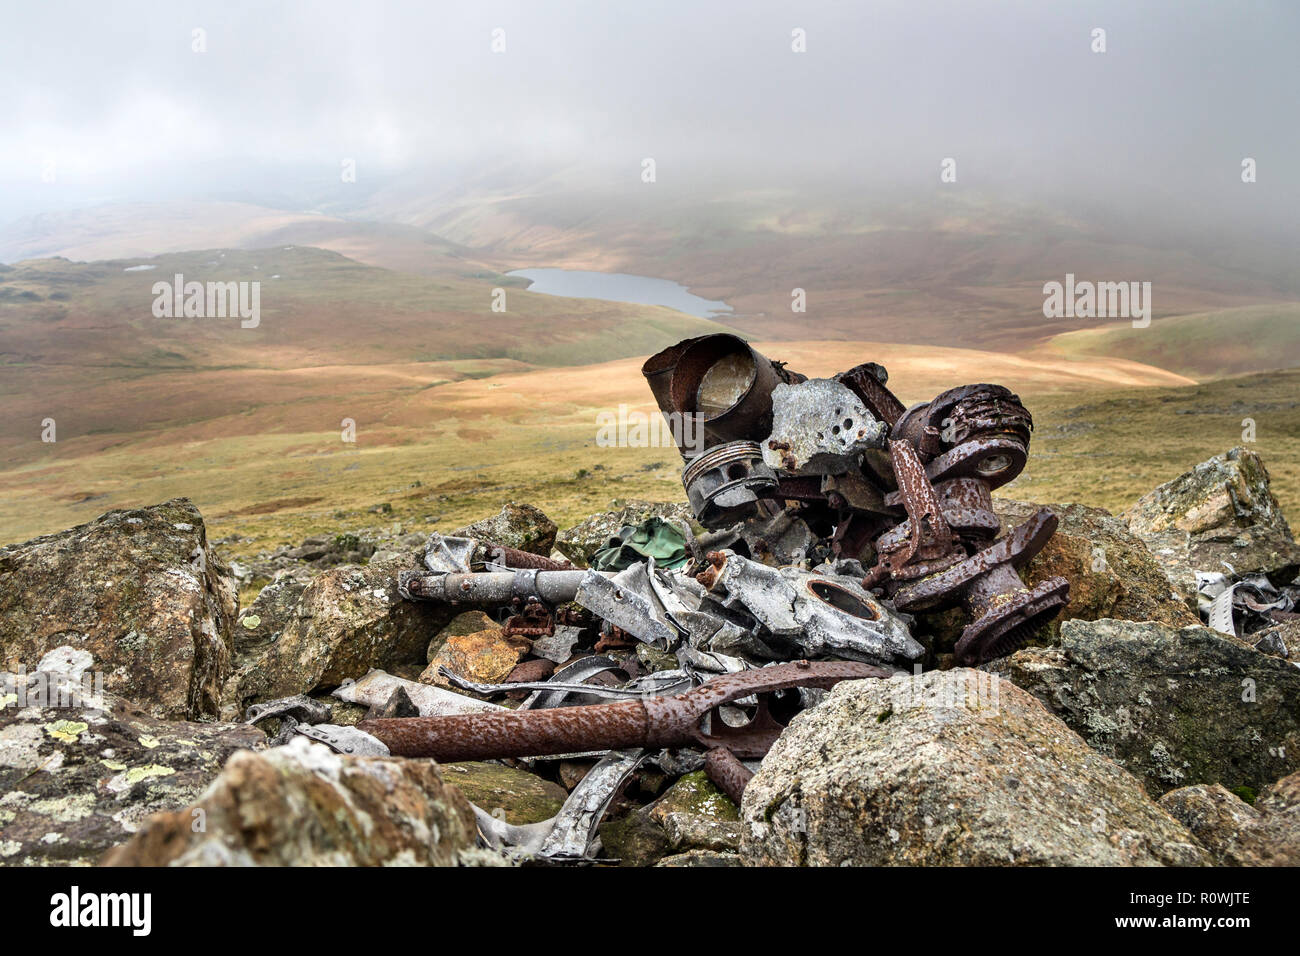 Wreckage from a Hurricane Aircraft Which Crashed on the Mountain of Slight Side Near Sca Fell on 12th August 1941, Lake District, Cumbria, UK Stock Photo